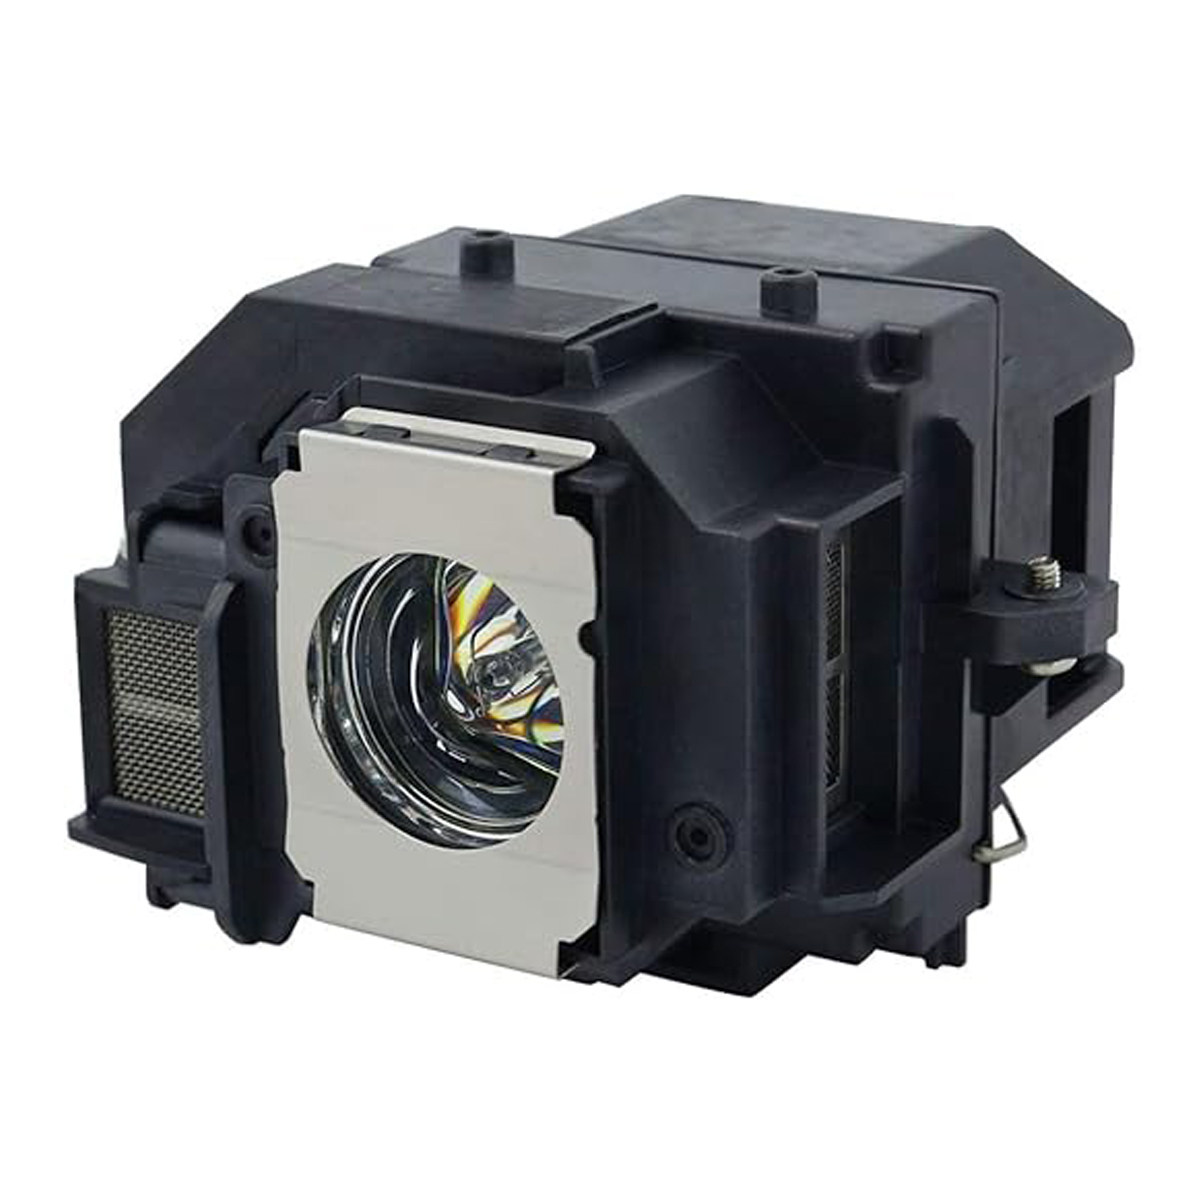 Replacement Projector lamp ELPLP58 For Epson EB-W10 EB-W9 EB-X10 EB-X9